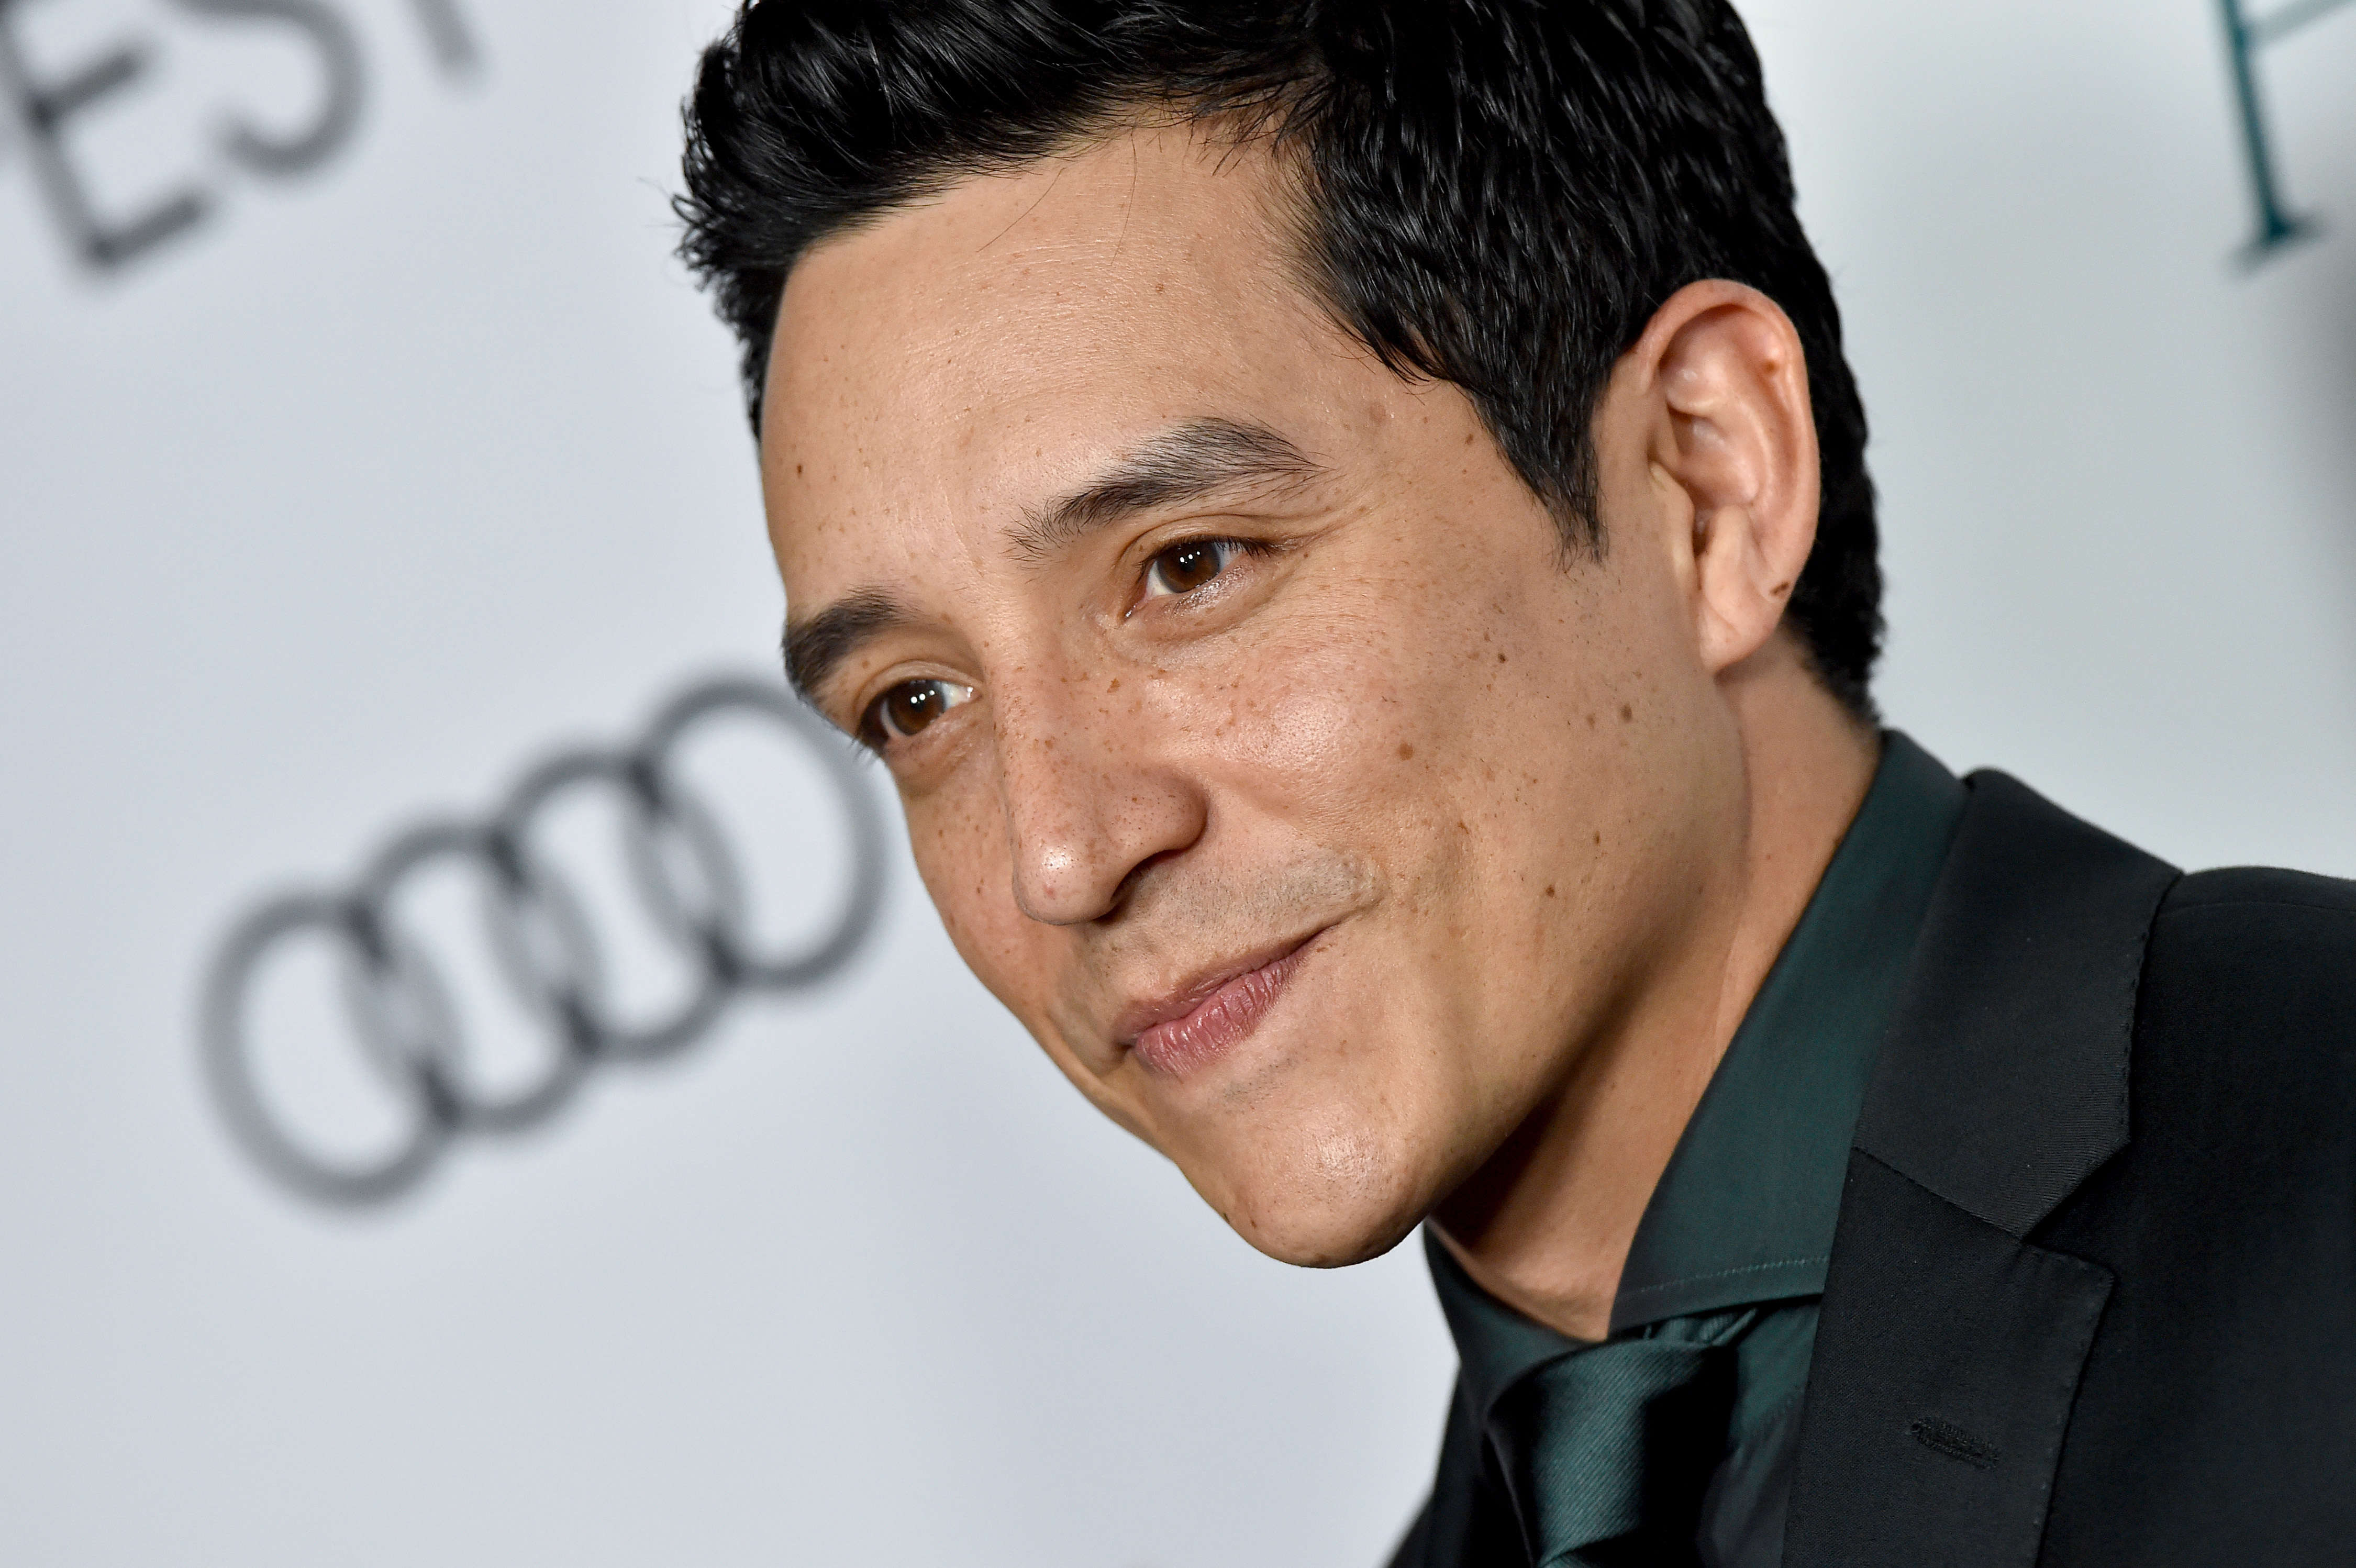 The Last of Us series casts Gabriel Luna as Joel's brother